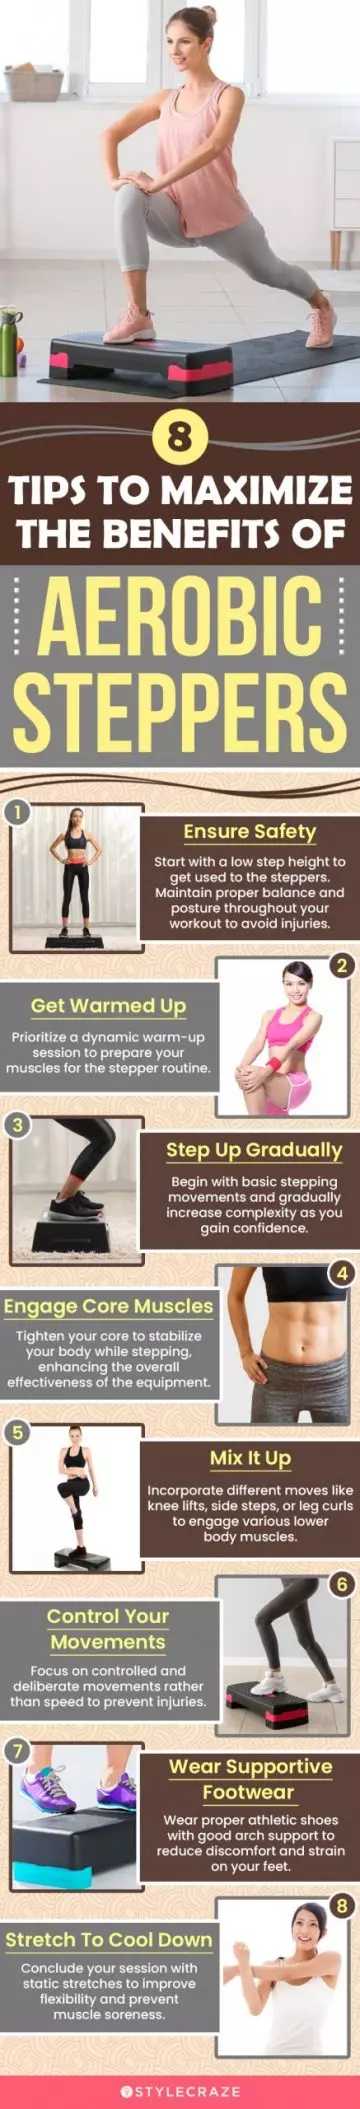 8 Tips To Maximize The Benefits Of Aerobic Steppers (infographic)